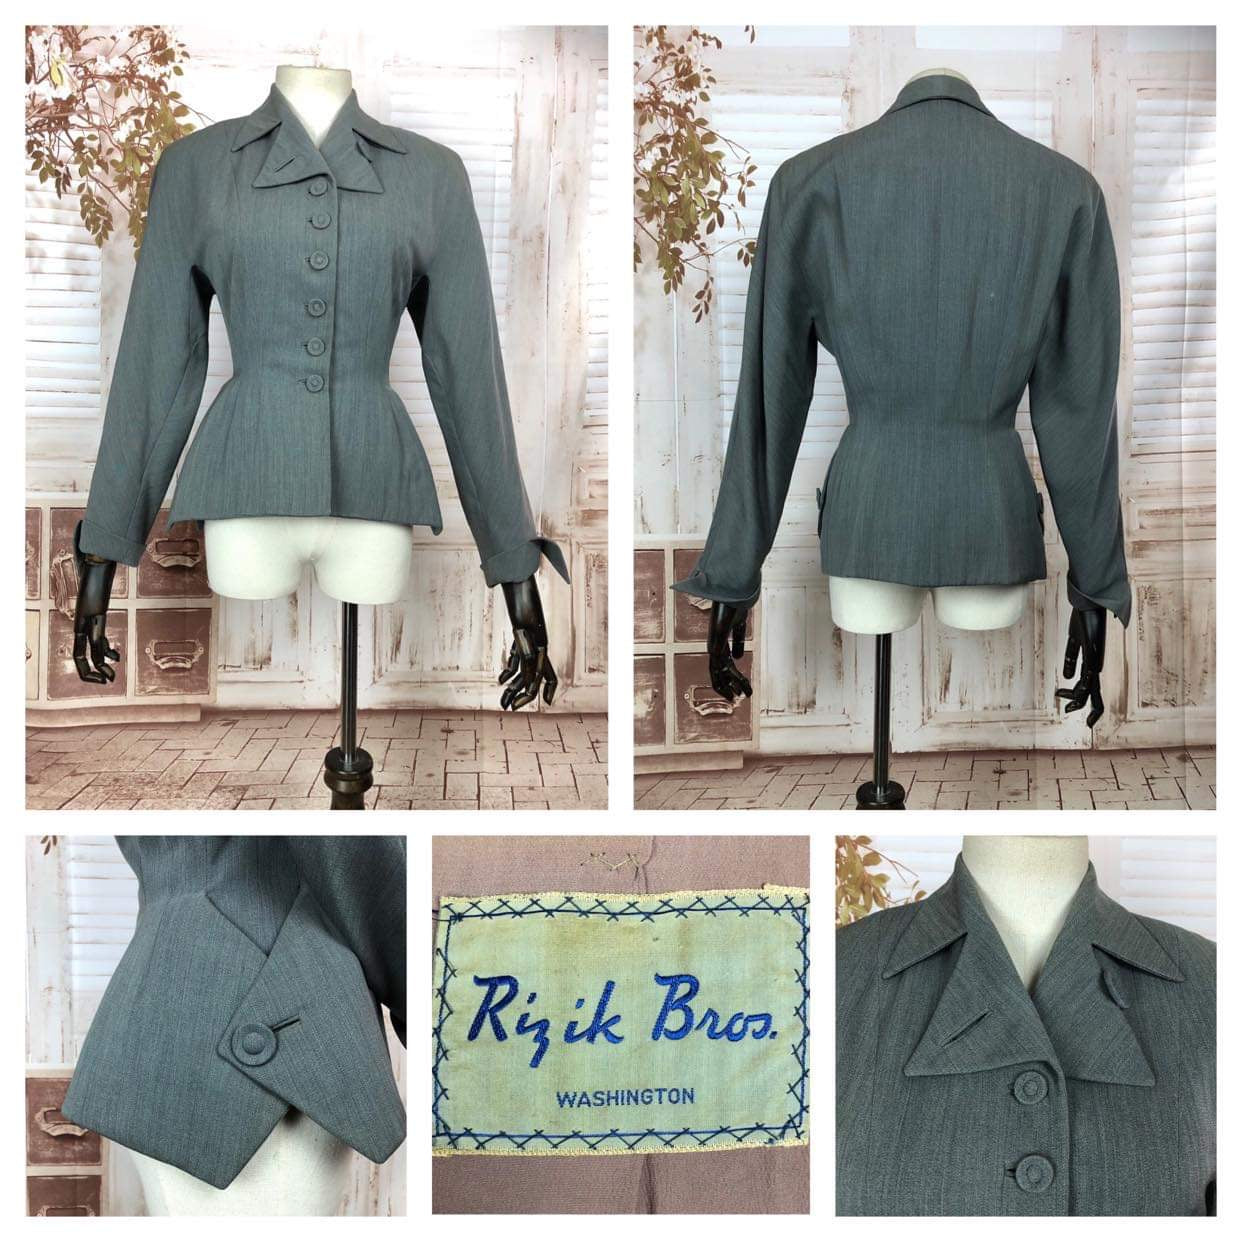 LAYAWAY PAYMENT 3 OF 3 - RESERVED FOR SARA - Fabulous Original Vintage 1940s 40s Grey Blazer With Amazing Pocket Details